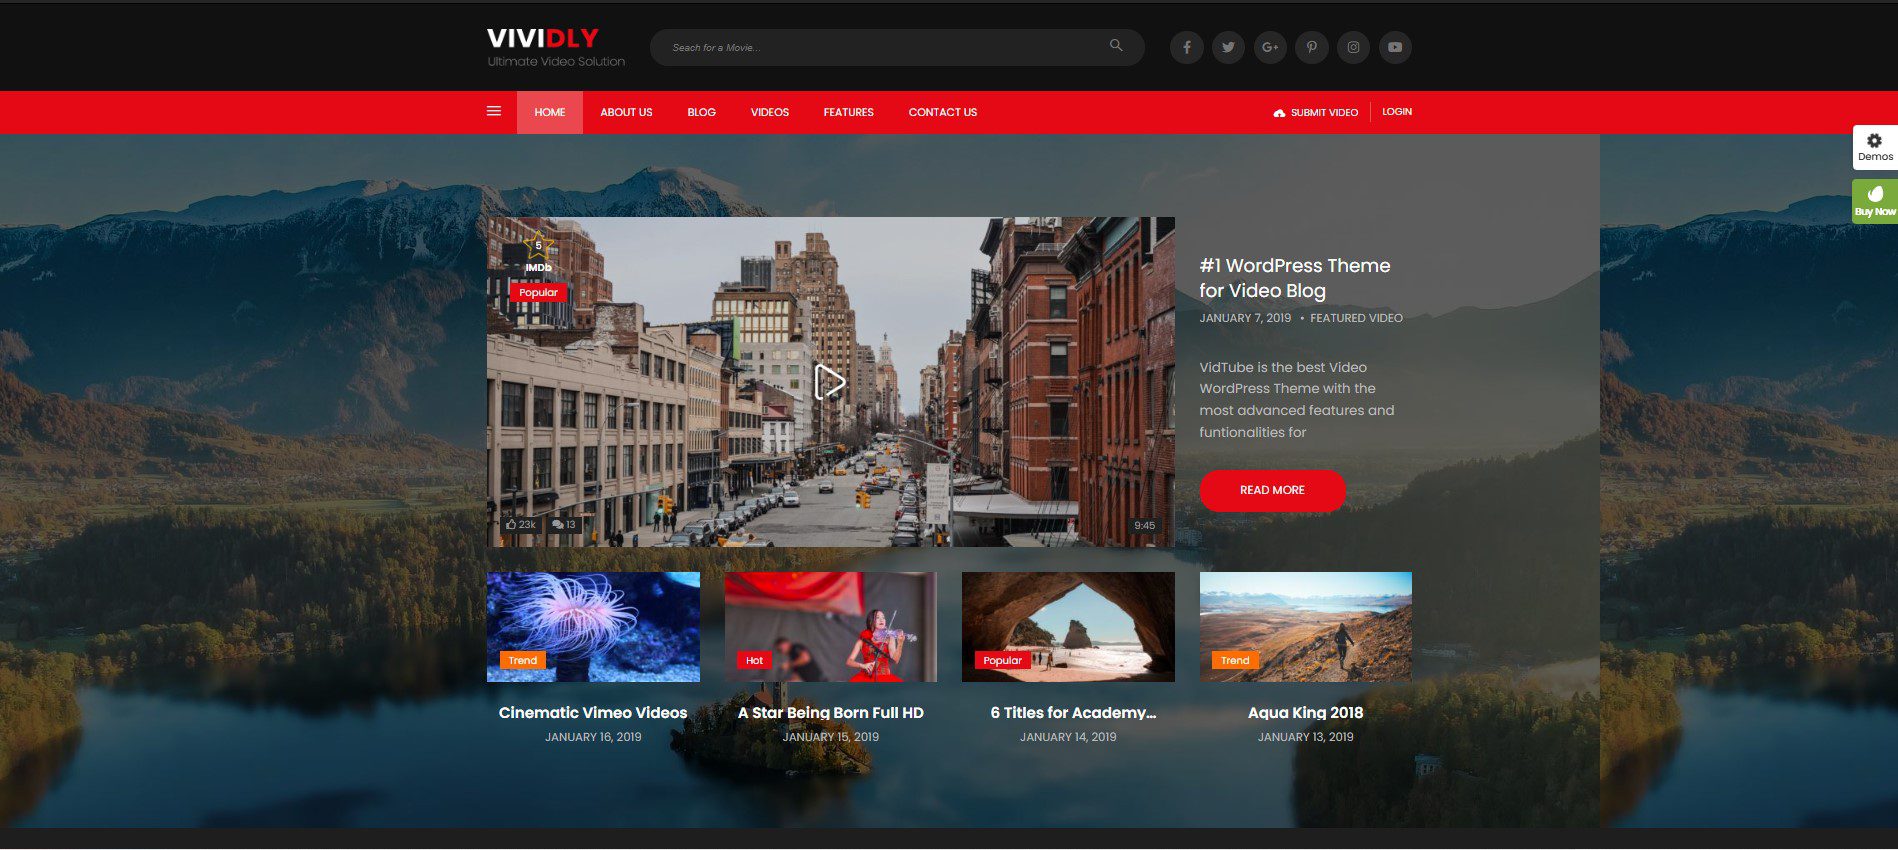 vividly - the stunning one of the best landing page wordpress themes